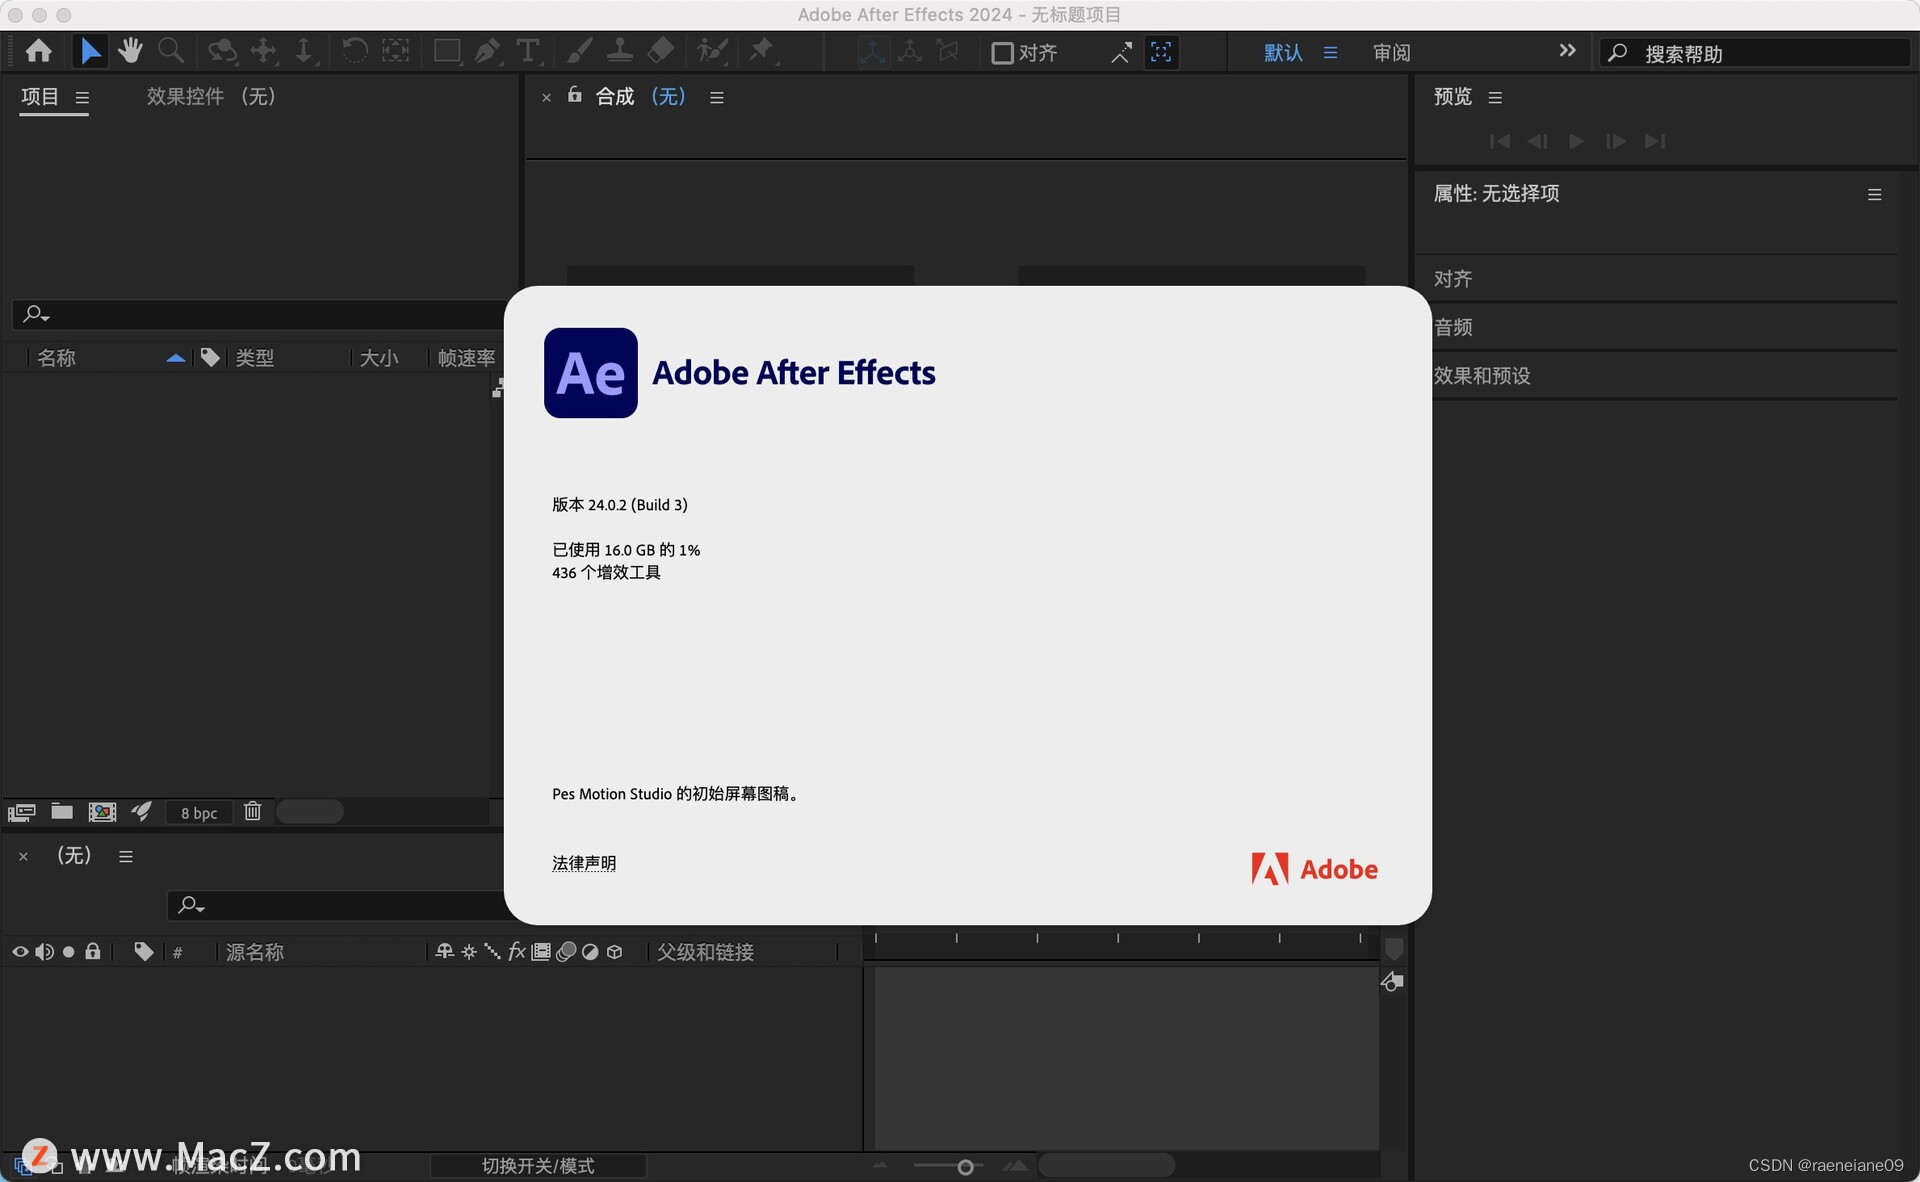 Adobe After Effects 2024 v24.0.0.55 instal the new for windows